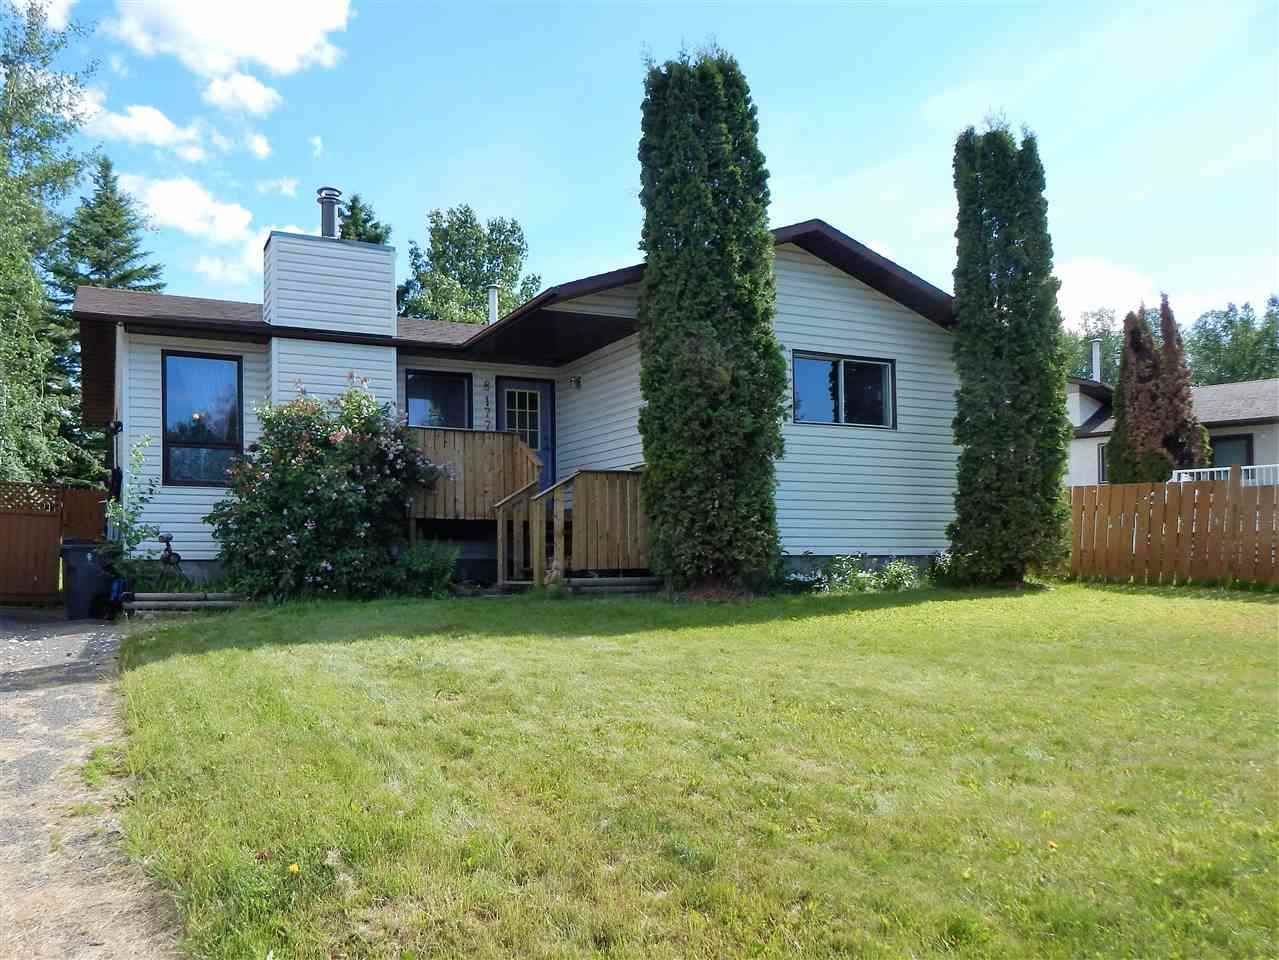 Main Photo: 8177 ST LAWRENCE Avenue in Prince George: St. Lawrence Heights House for sale (PG City South (Zone 74))  : MLS®# R2494133